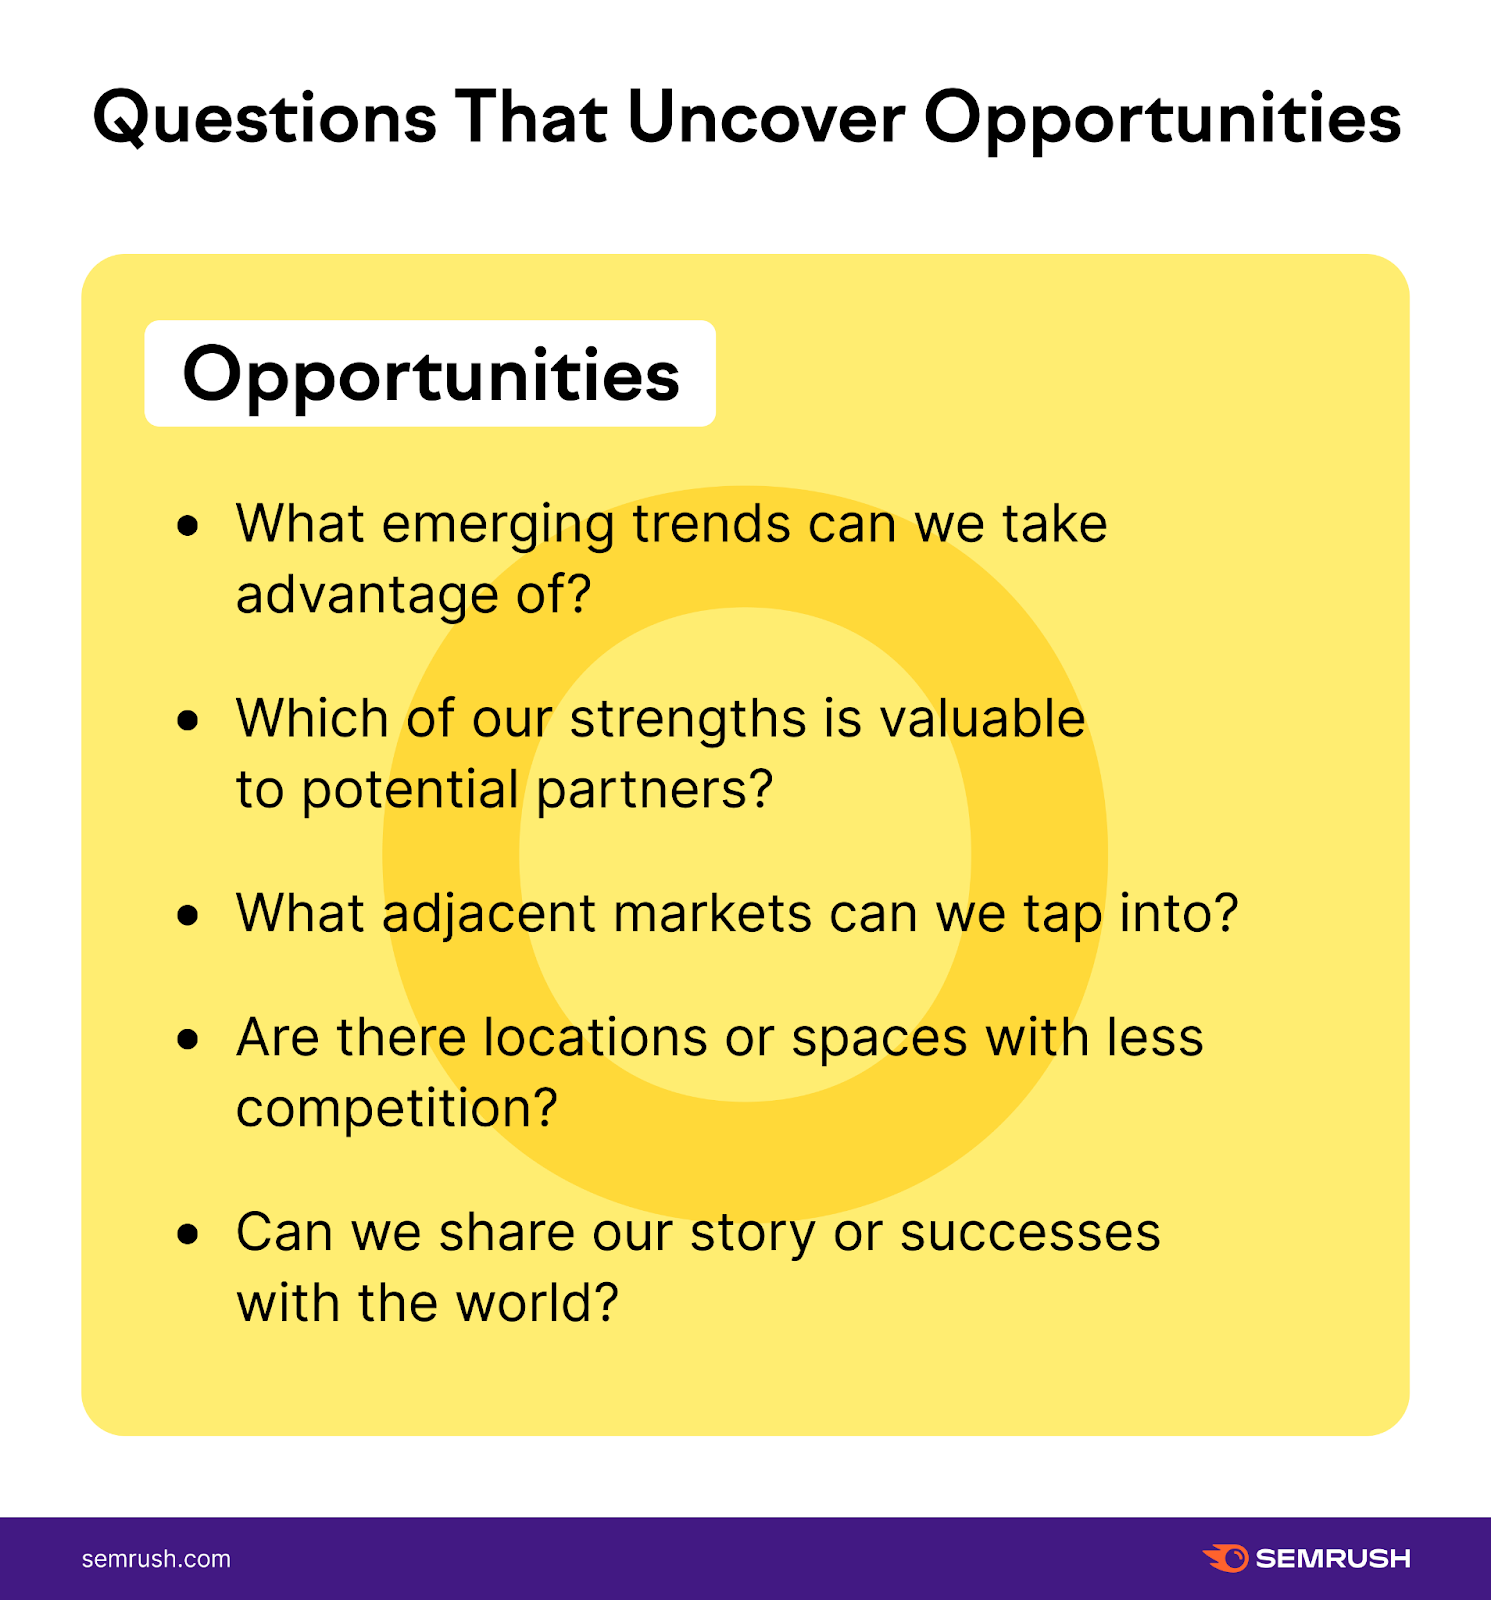 Five questions that uncover opportunities